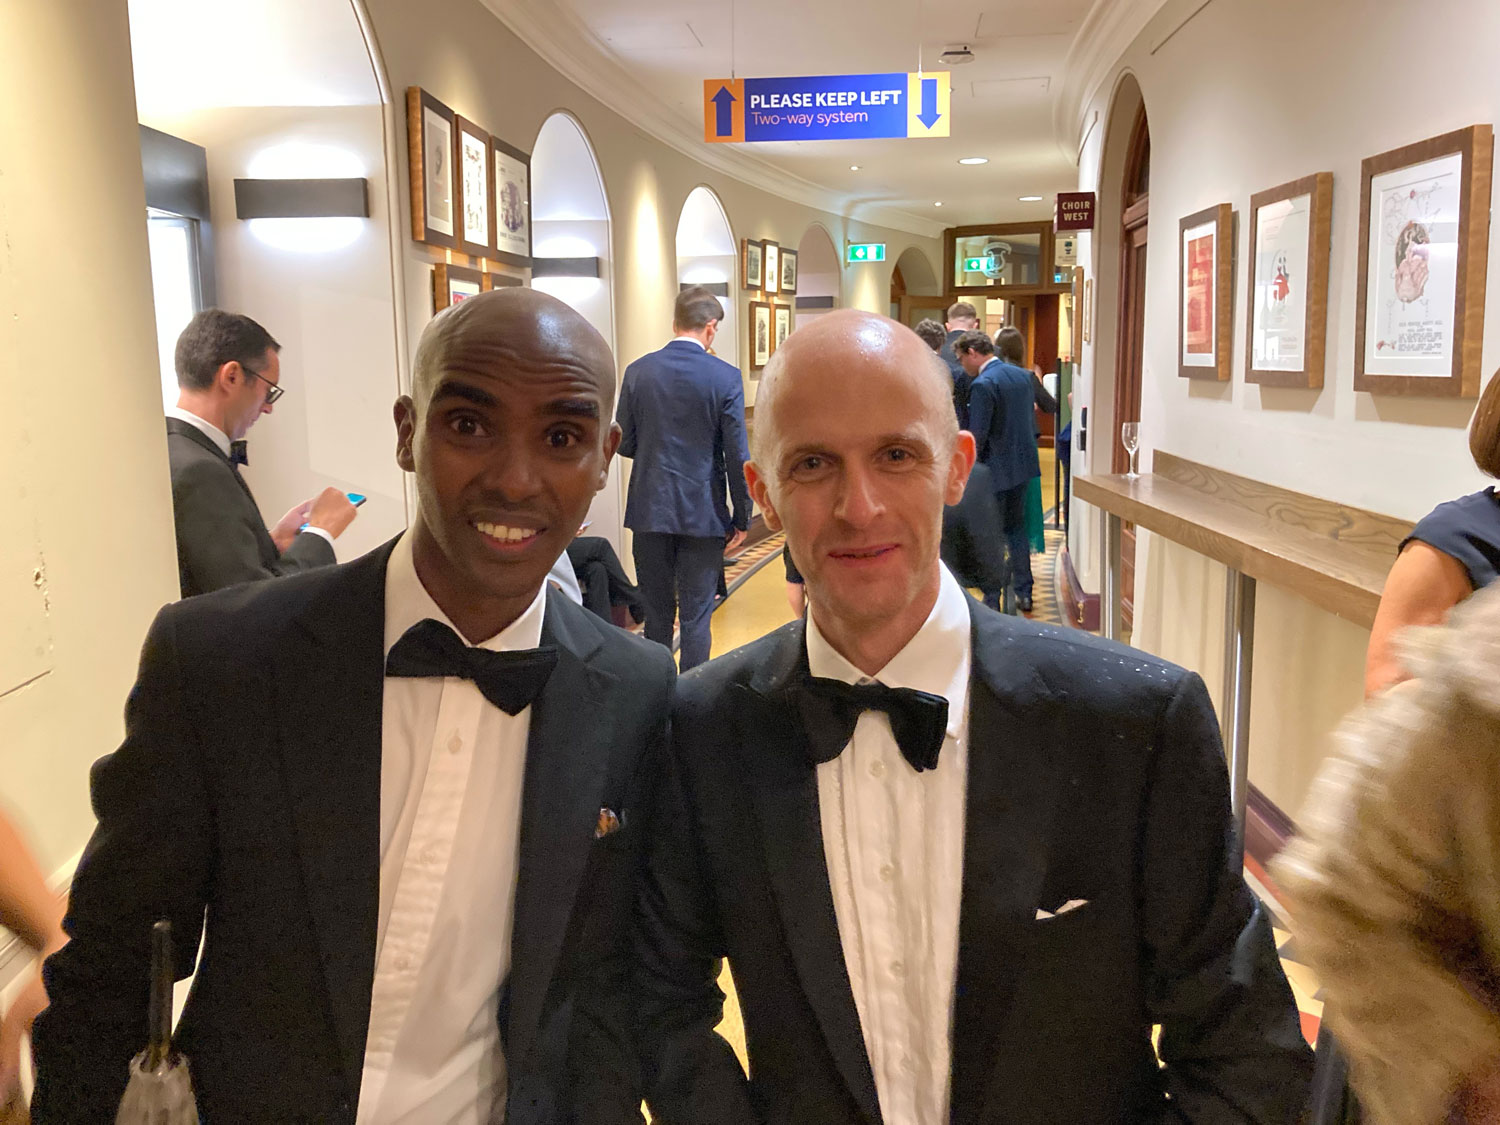 Mo Farah at the No Time to Die premiere